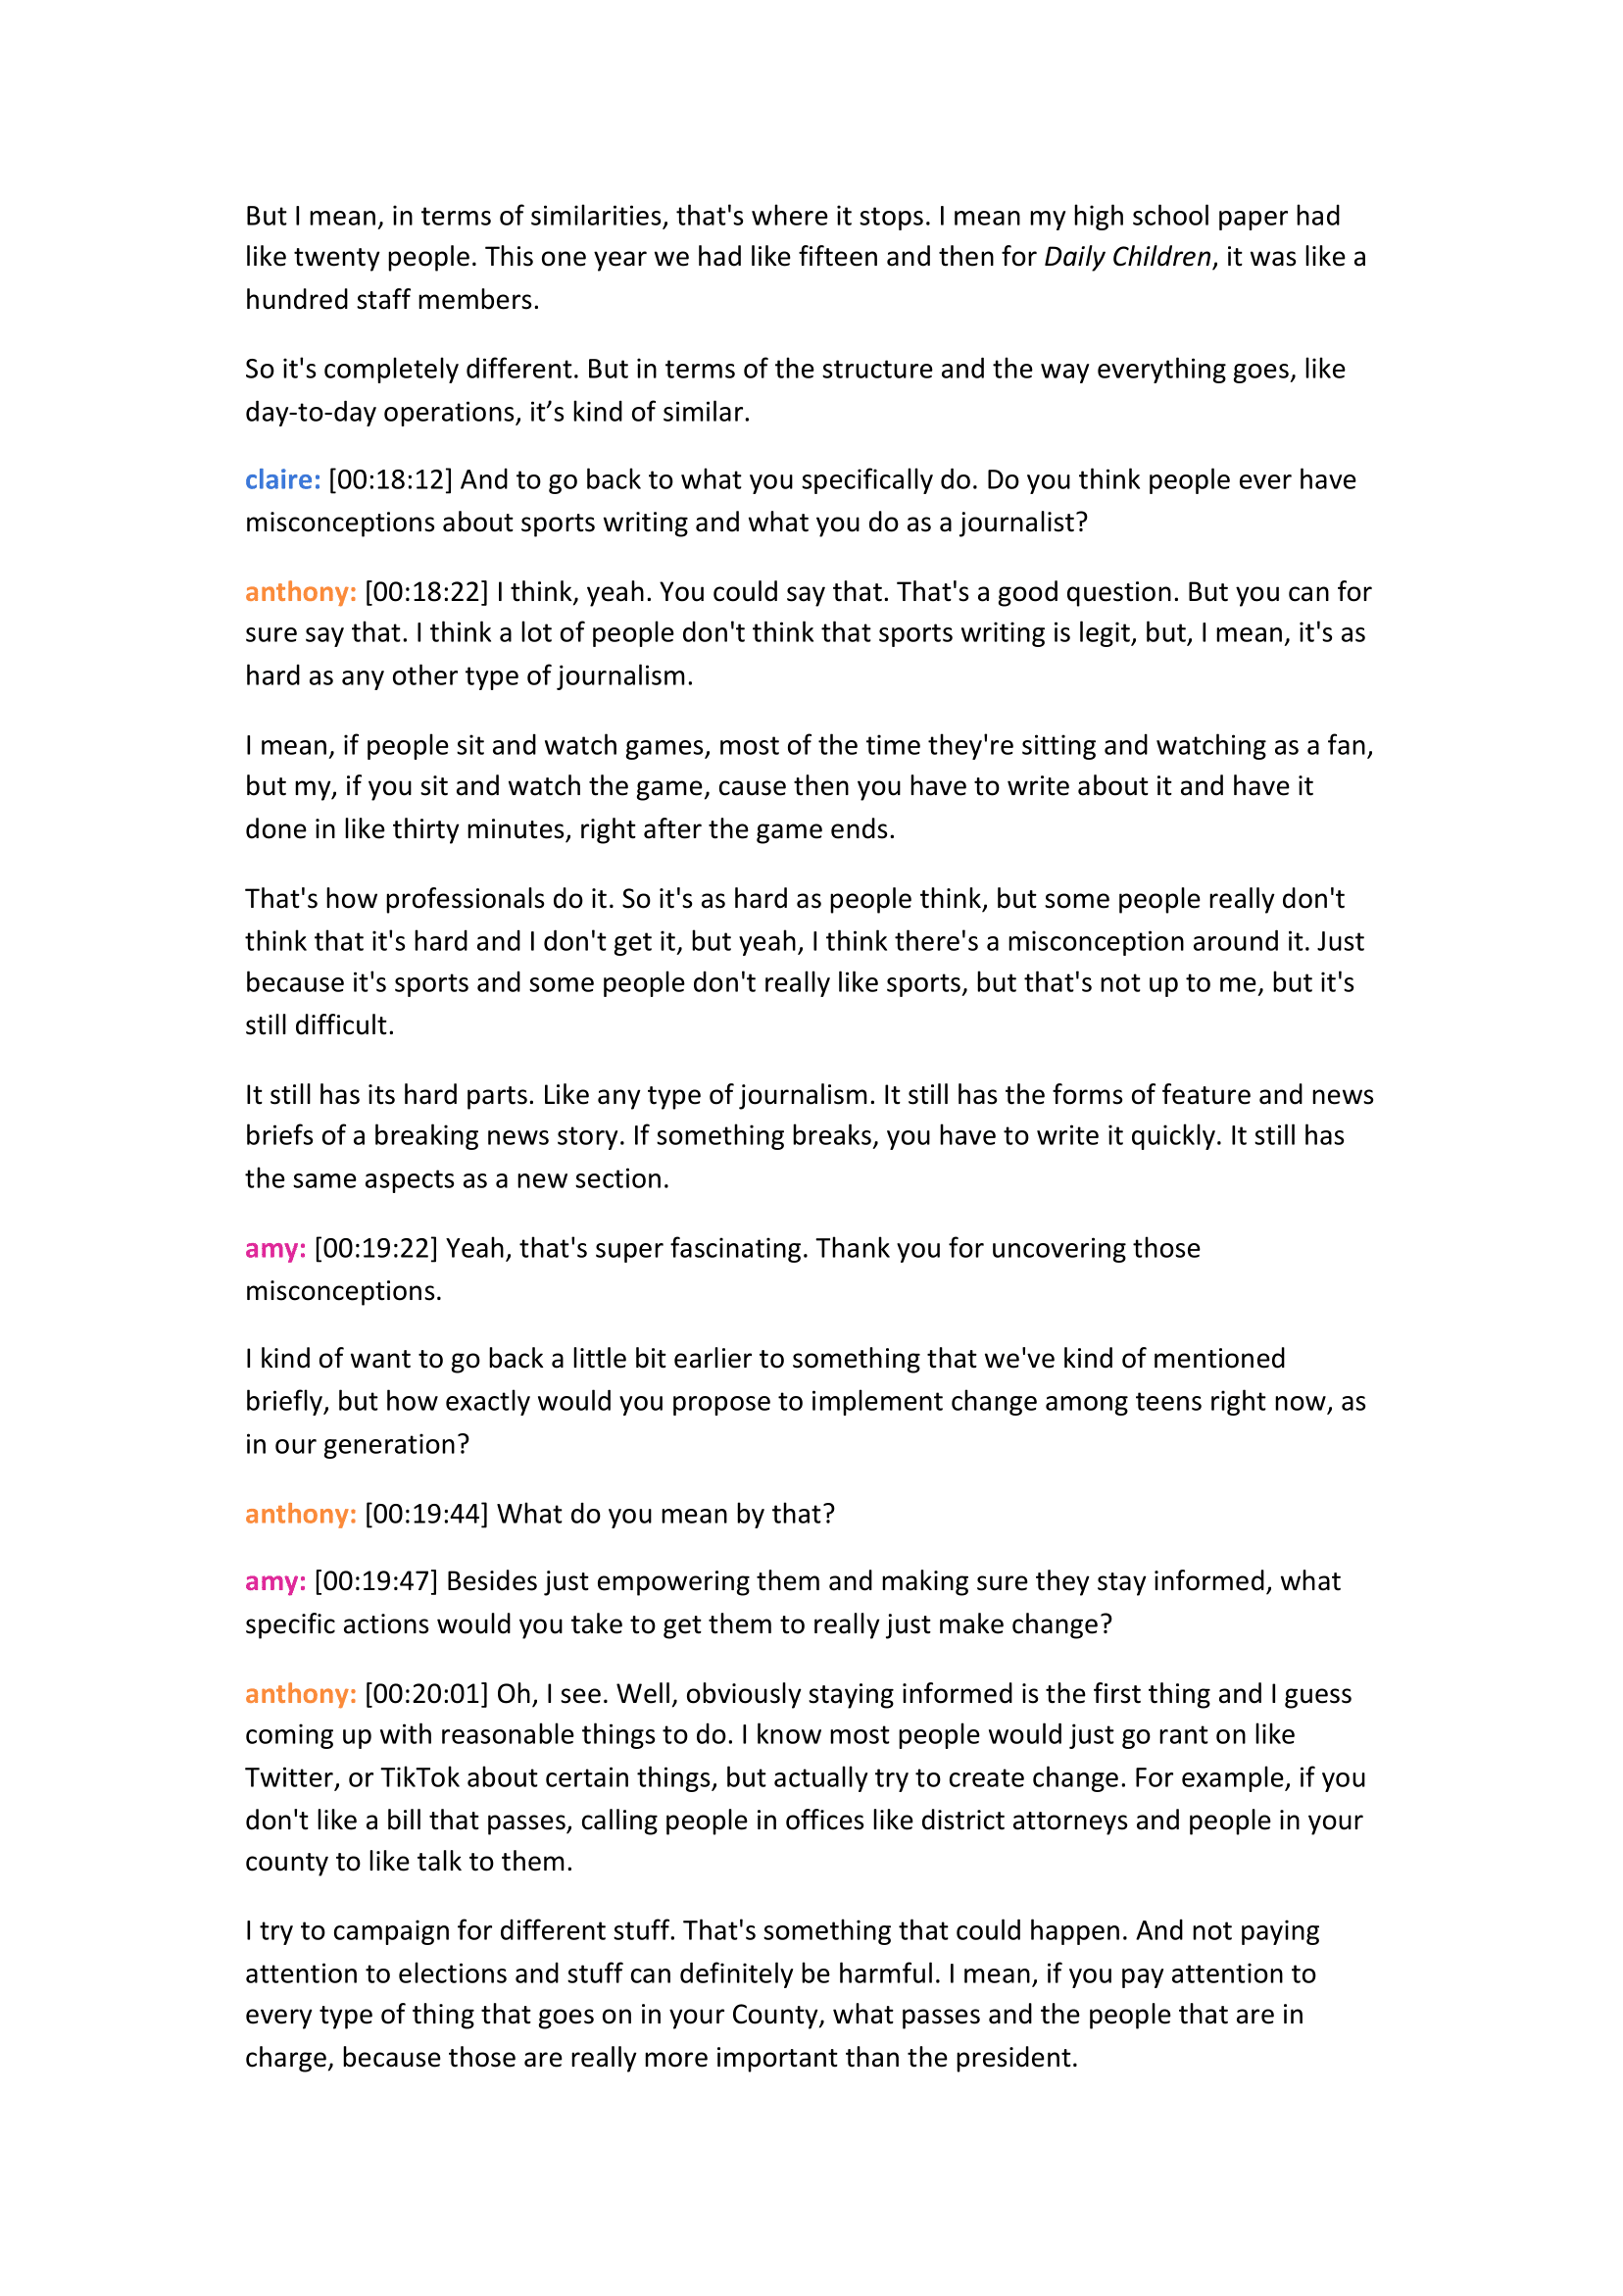 Uplift All Voices Ep 10 Transcript-7.png